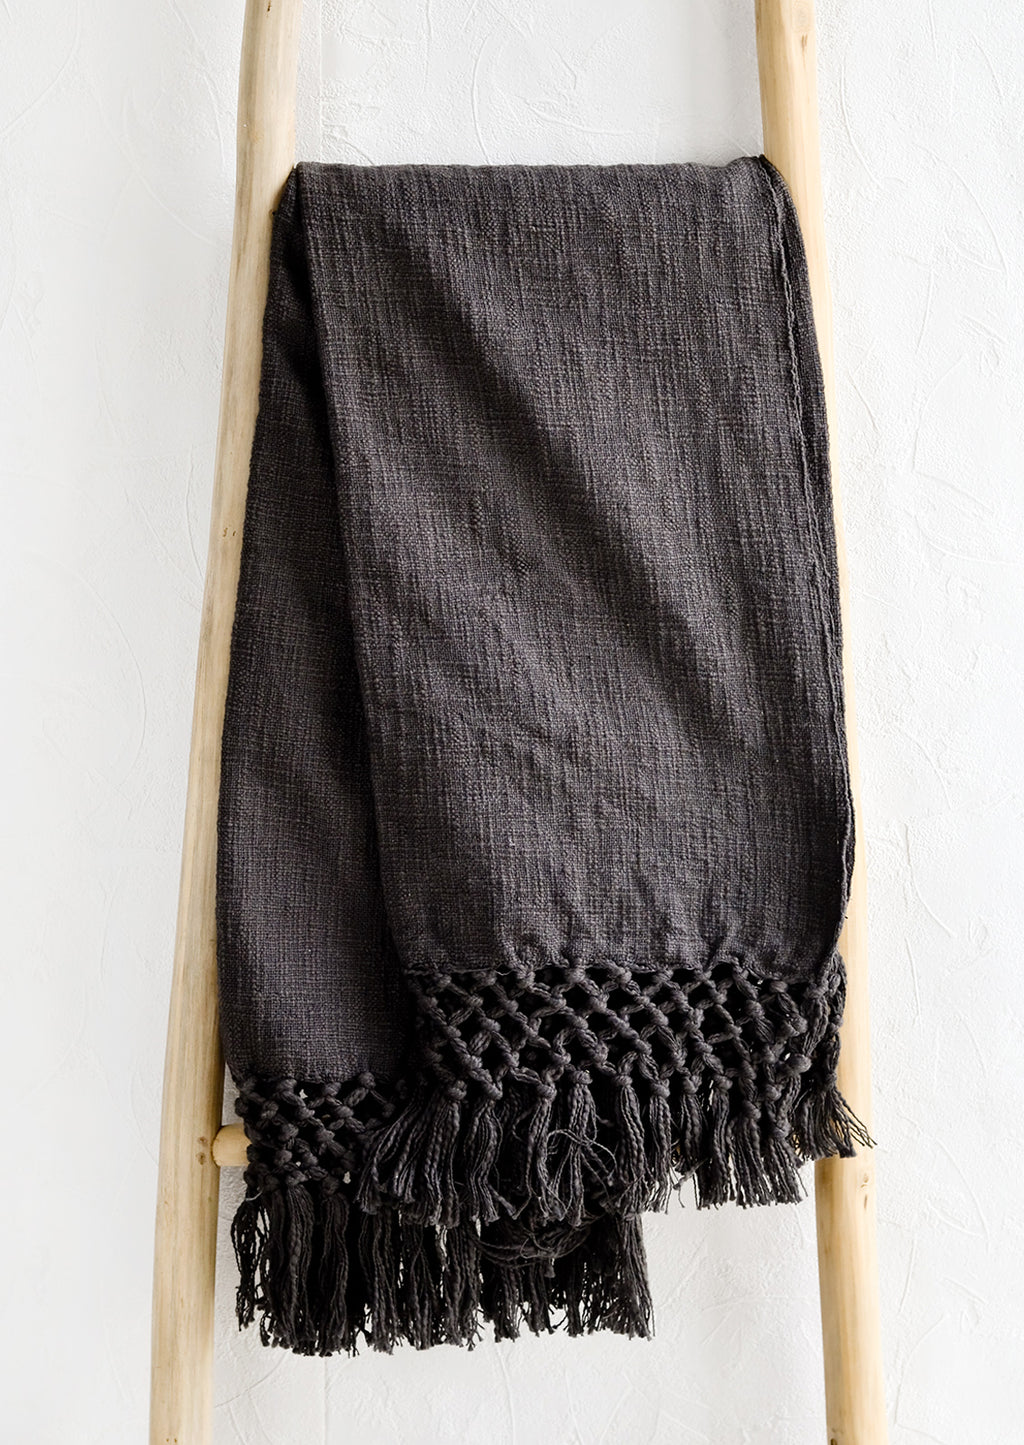 Carbon: A dark grey cotton throw blanket with knotted open weave trim, displayed on a ladder.